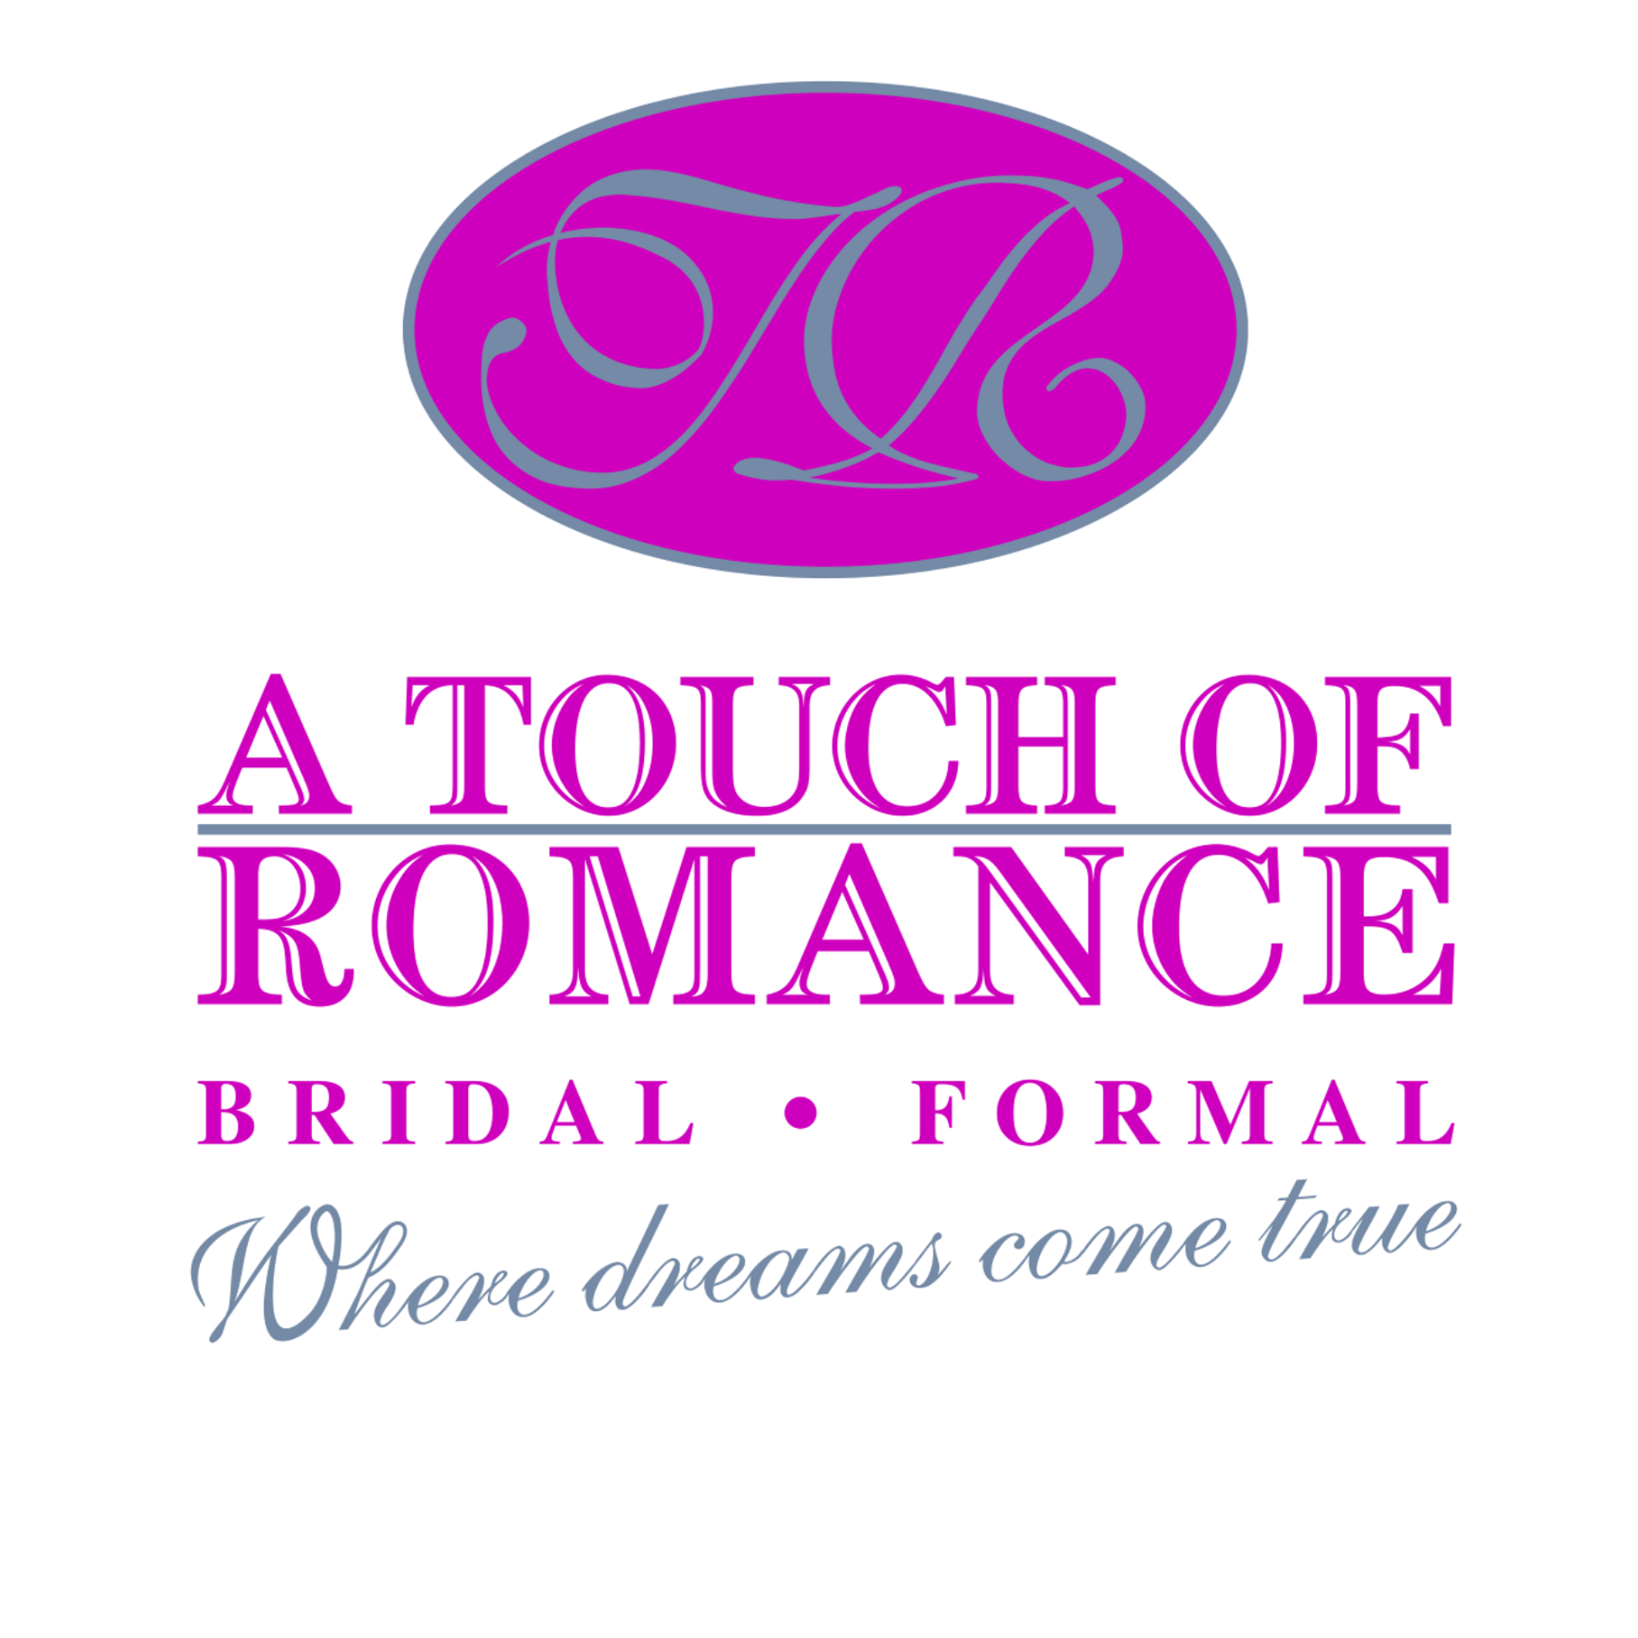 A Touch of Romance Bridal & Formal